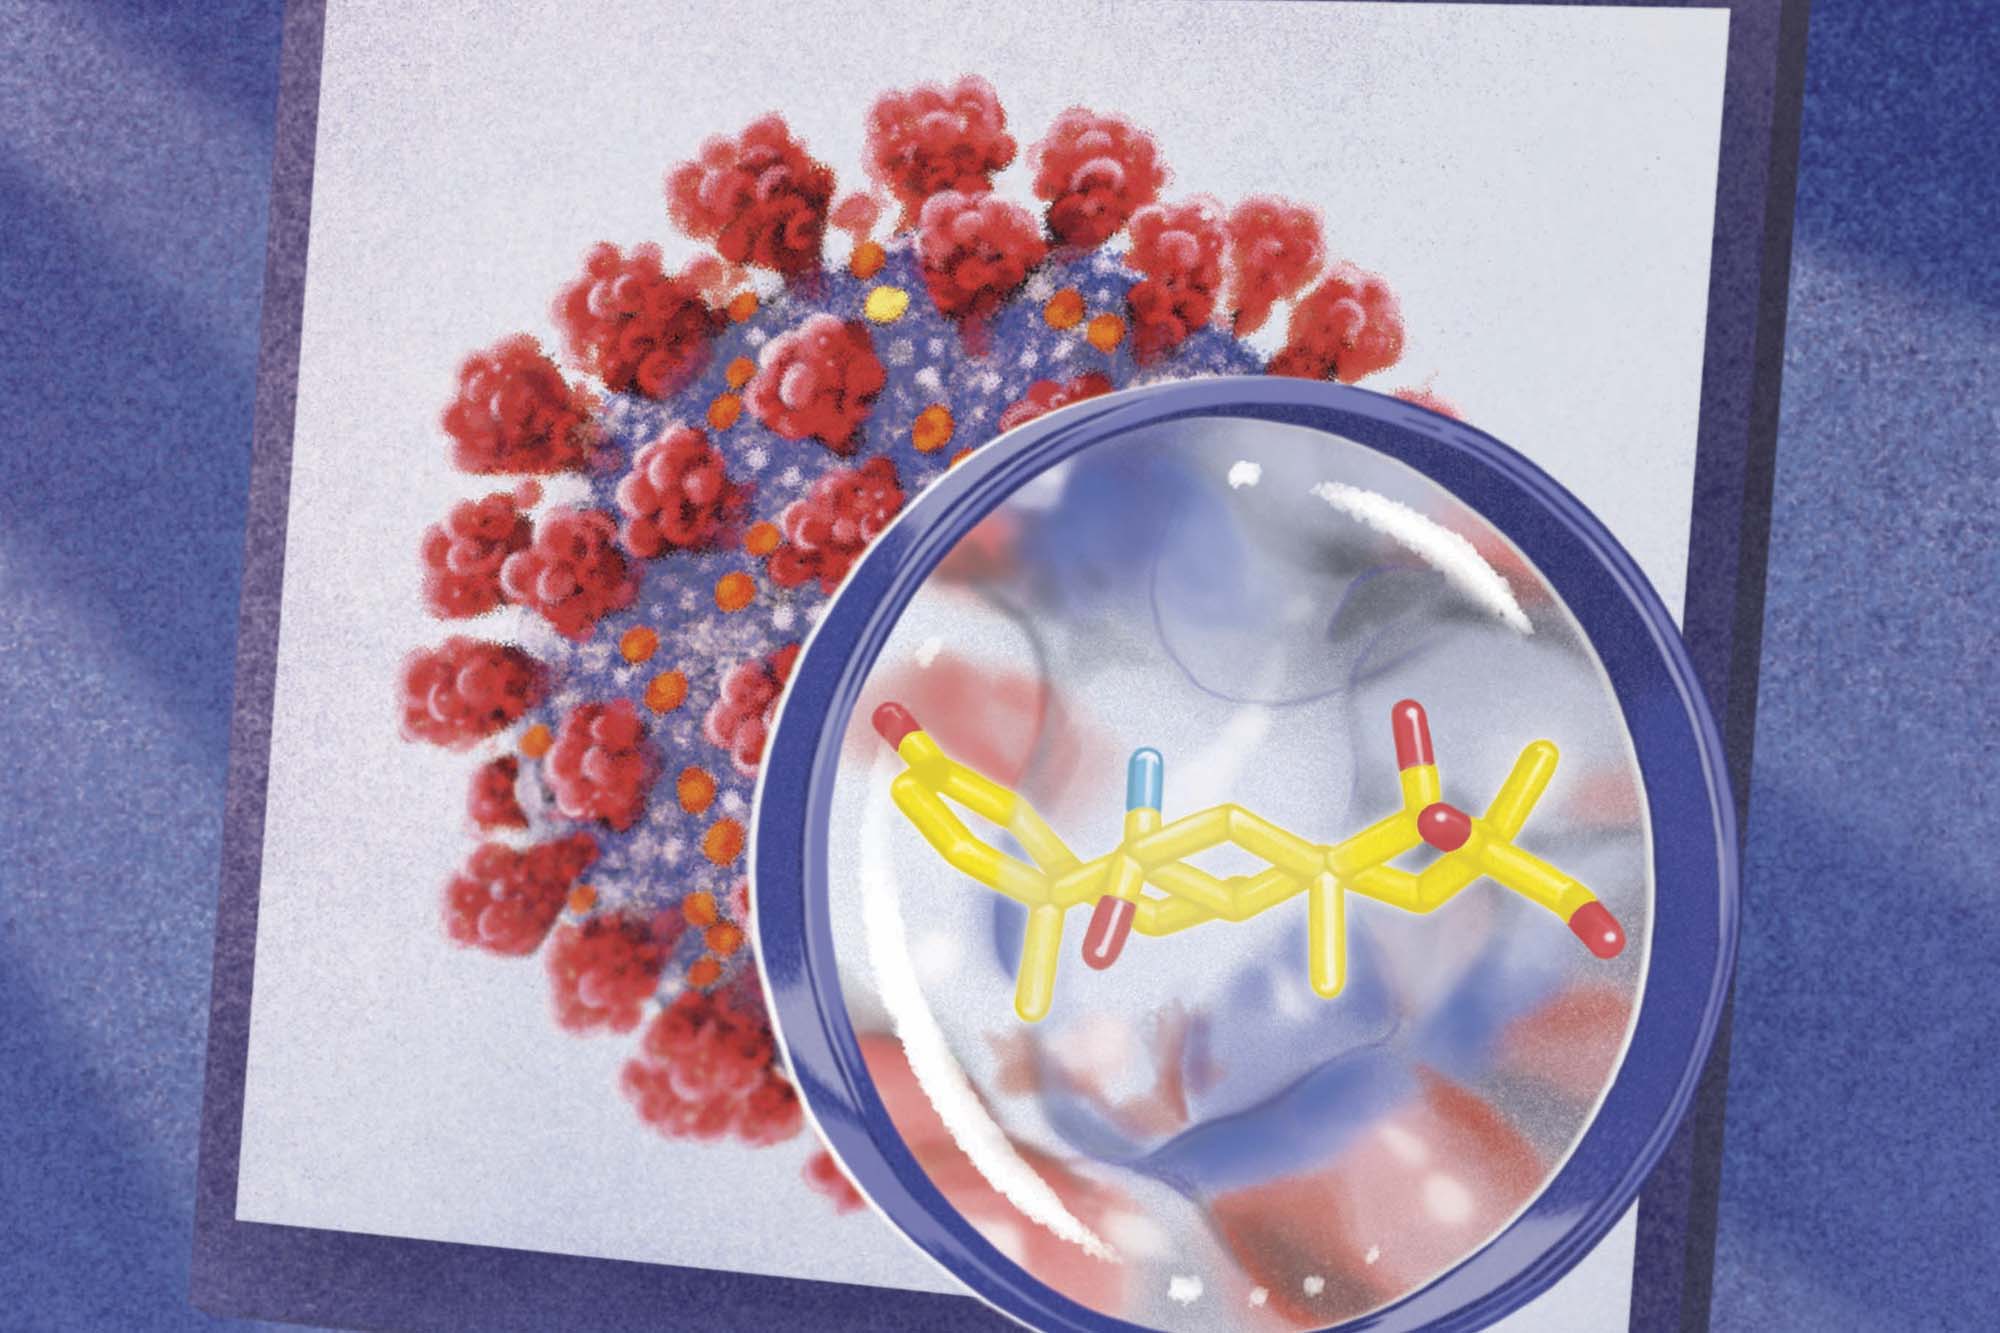 Illustration of covid-19 virus and a petri dish with dna makeup